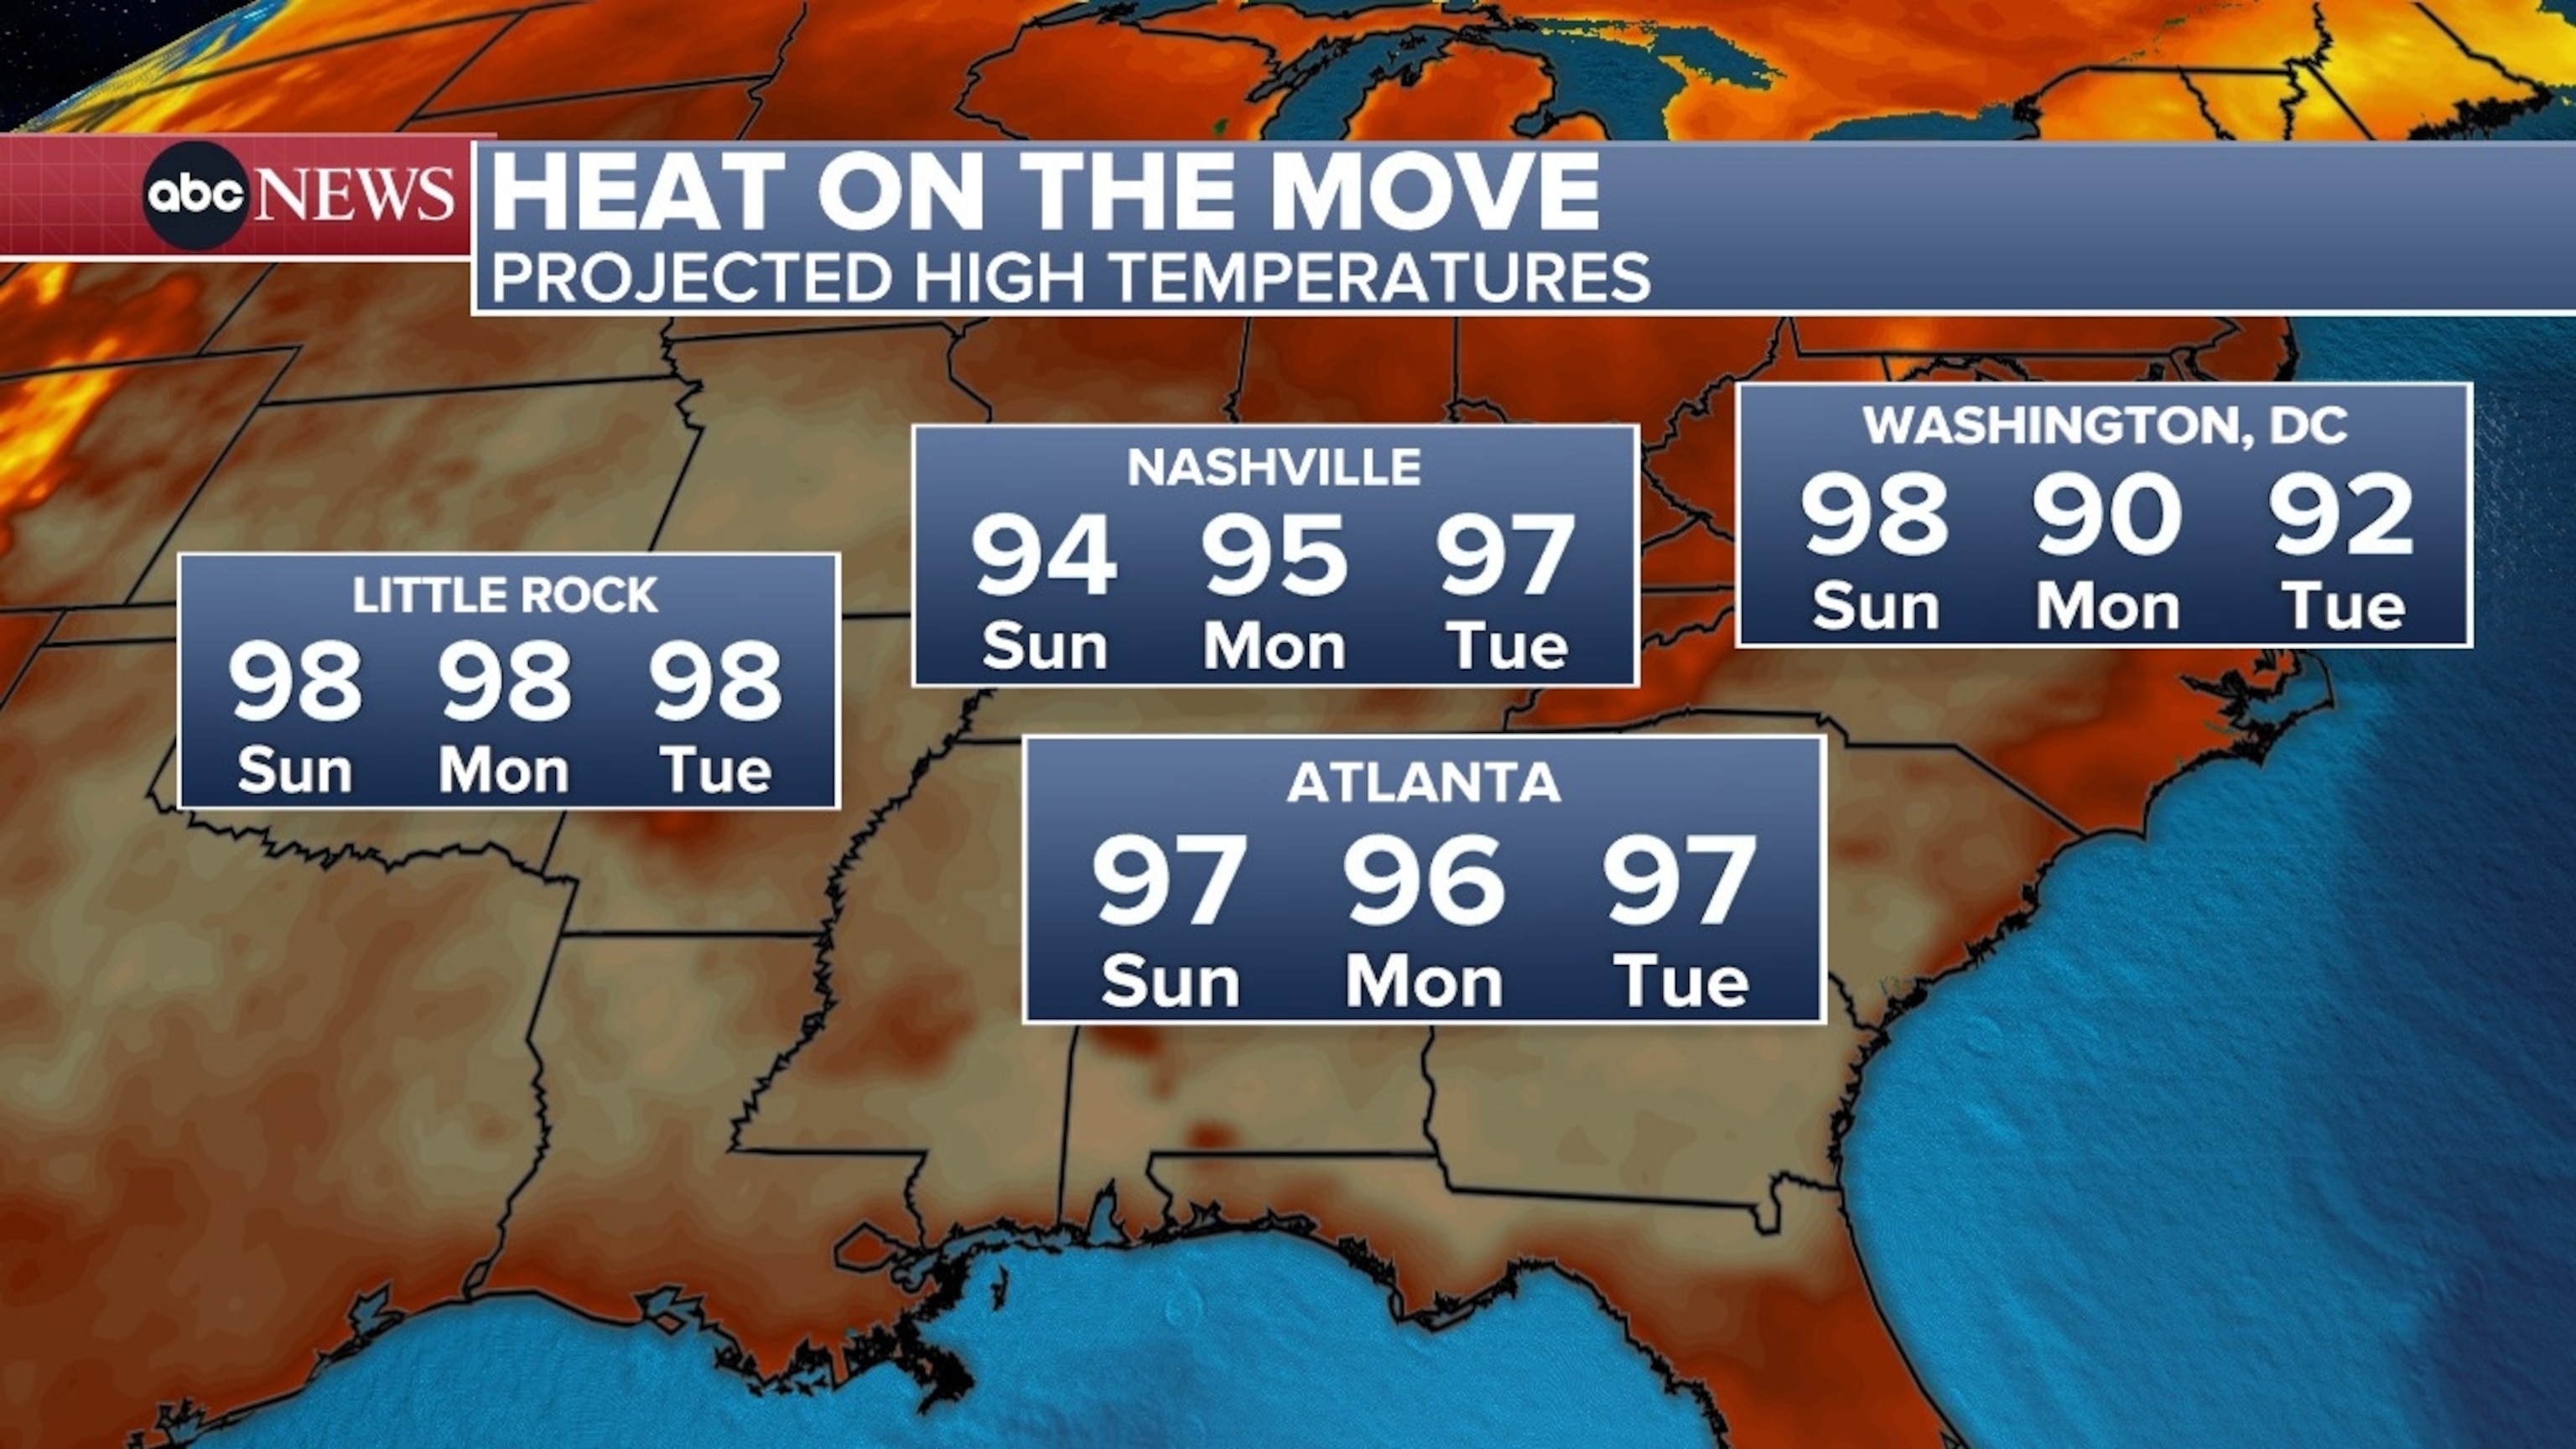 PHOTO: Heat on the move weather graphic